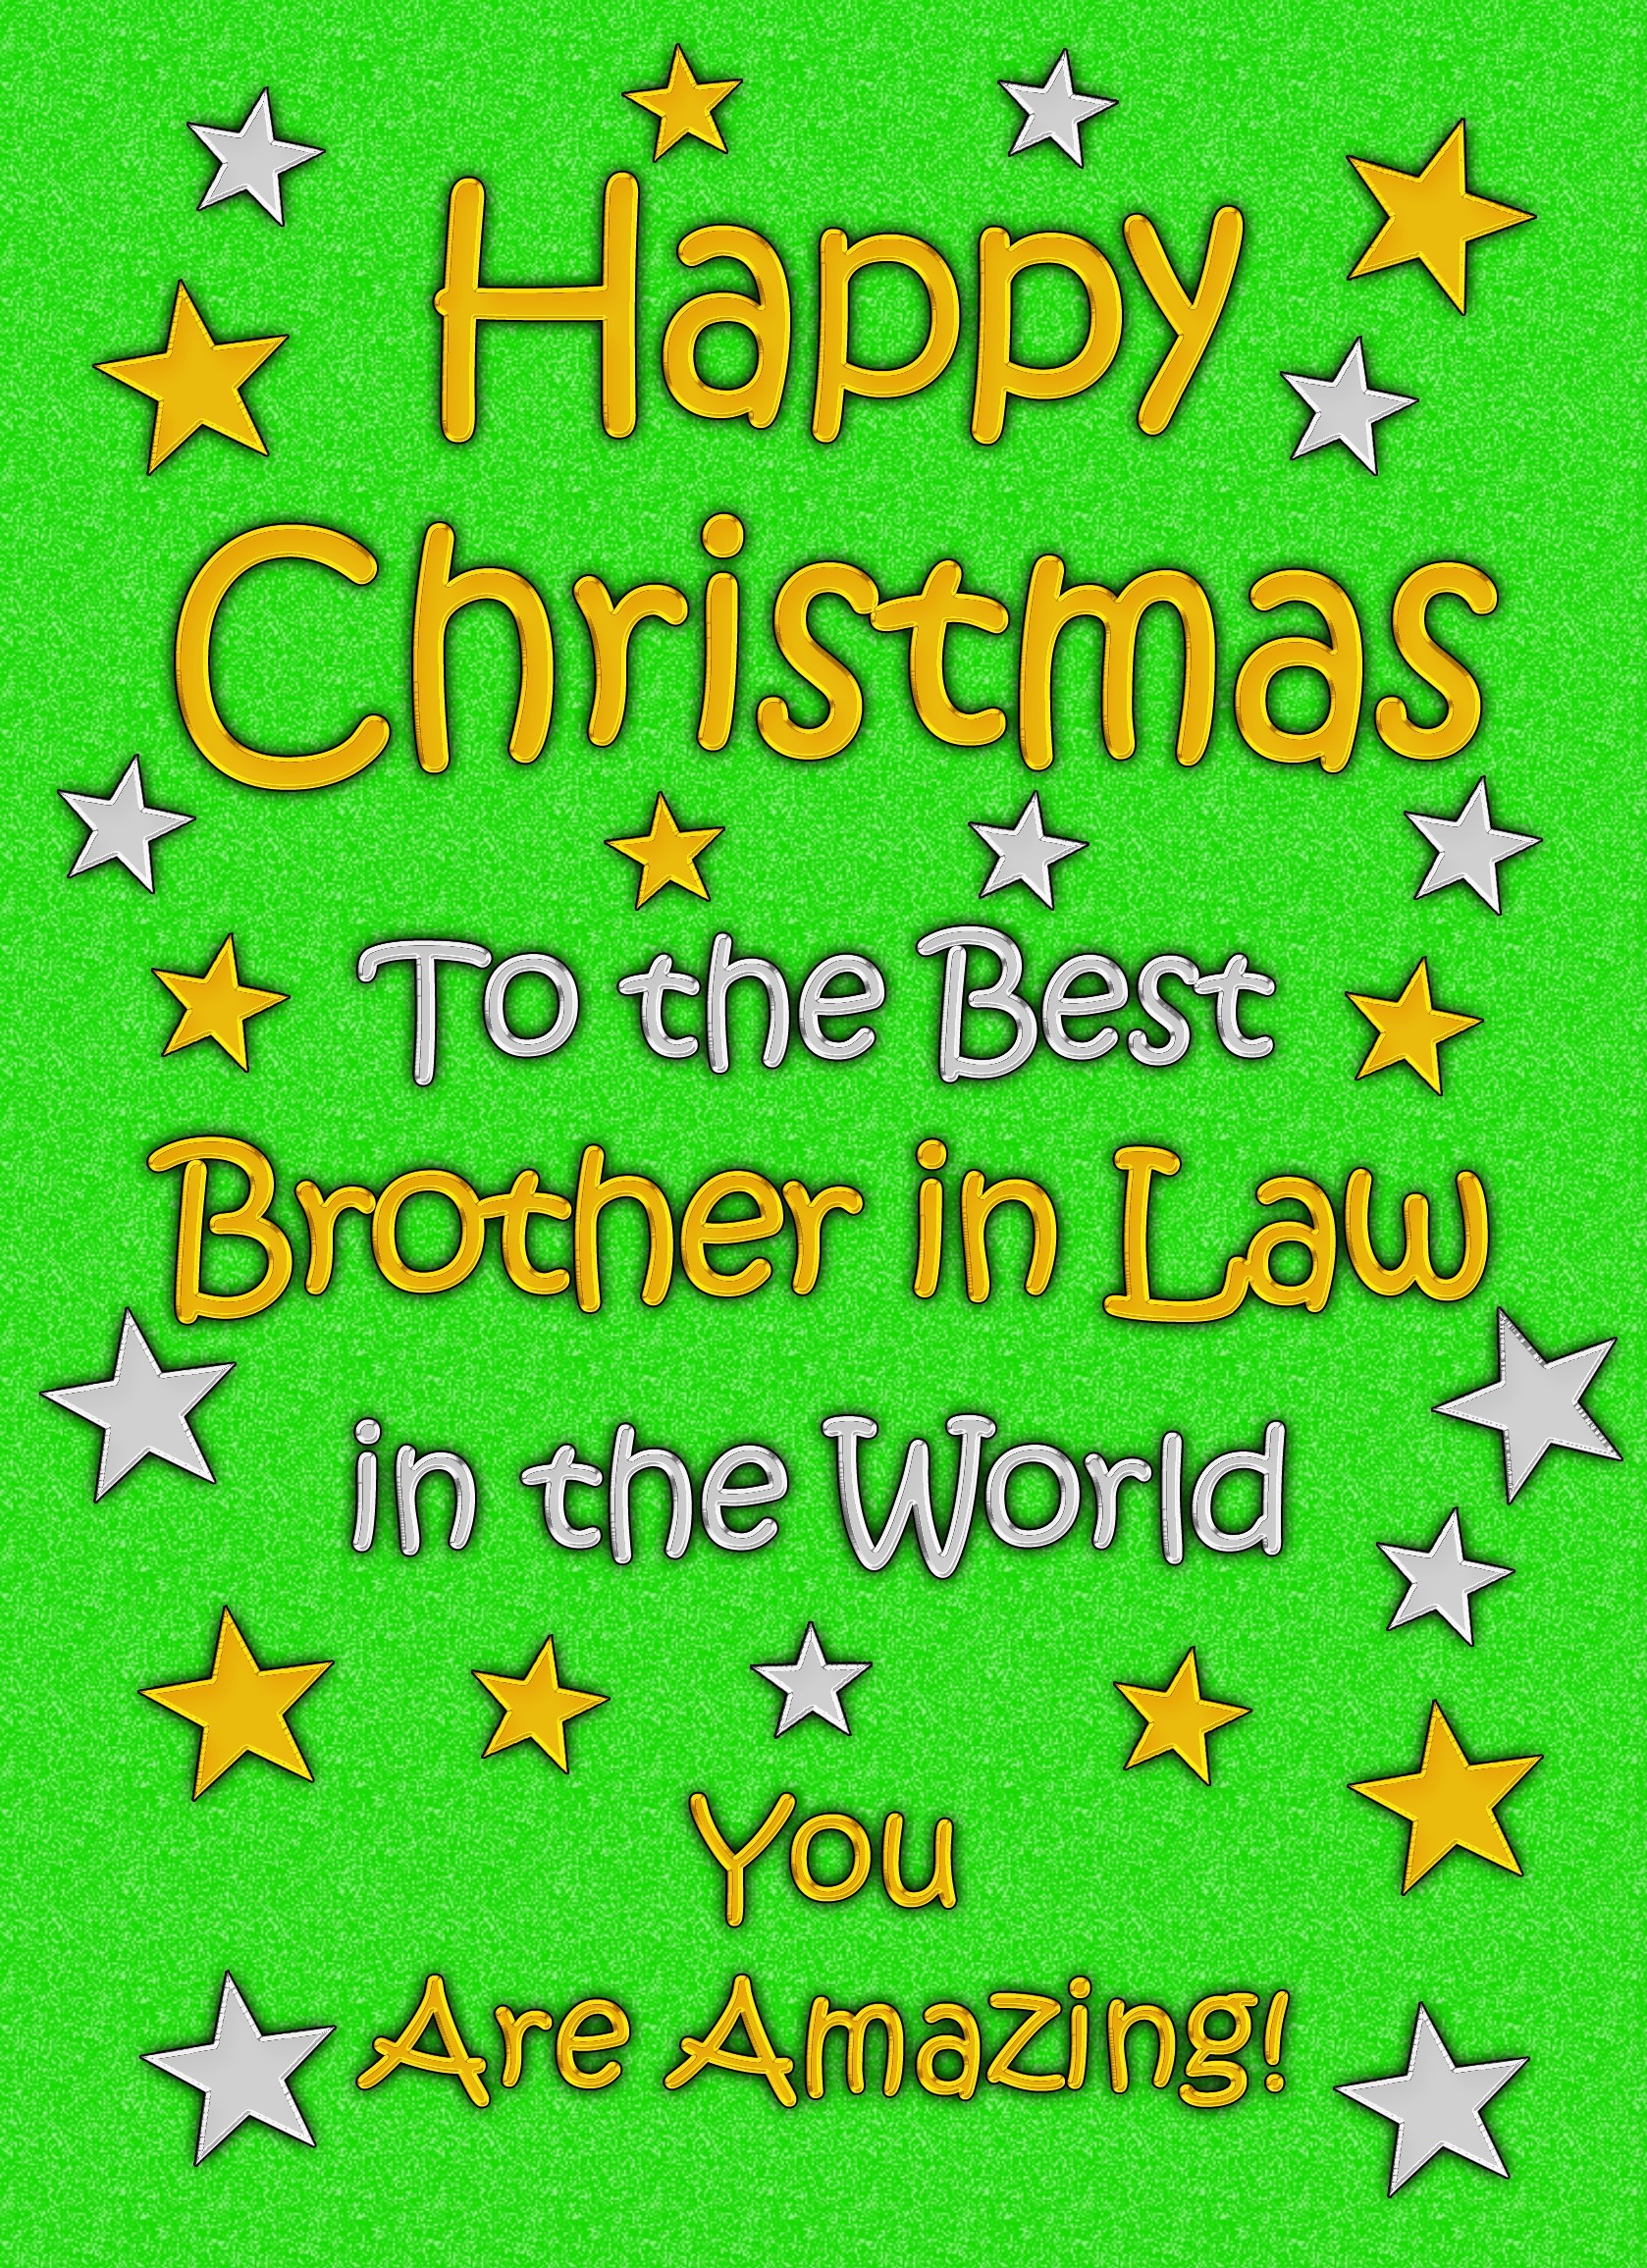 Brother in Law Christmas Card (Green)